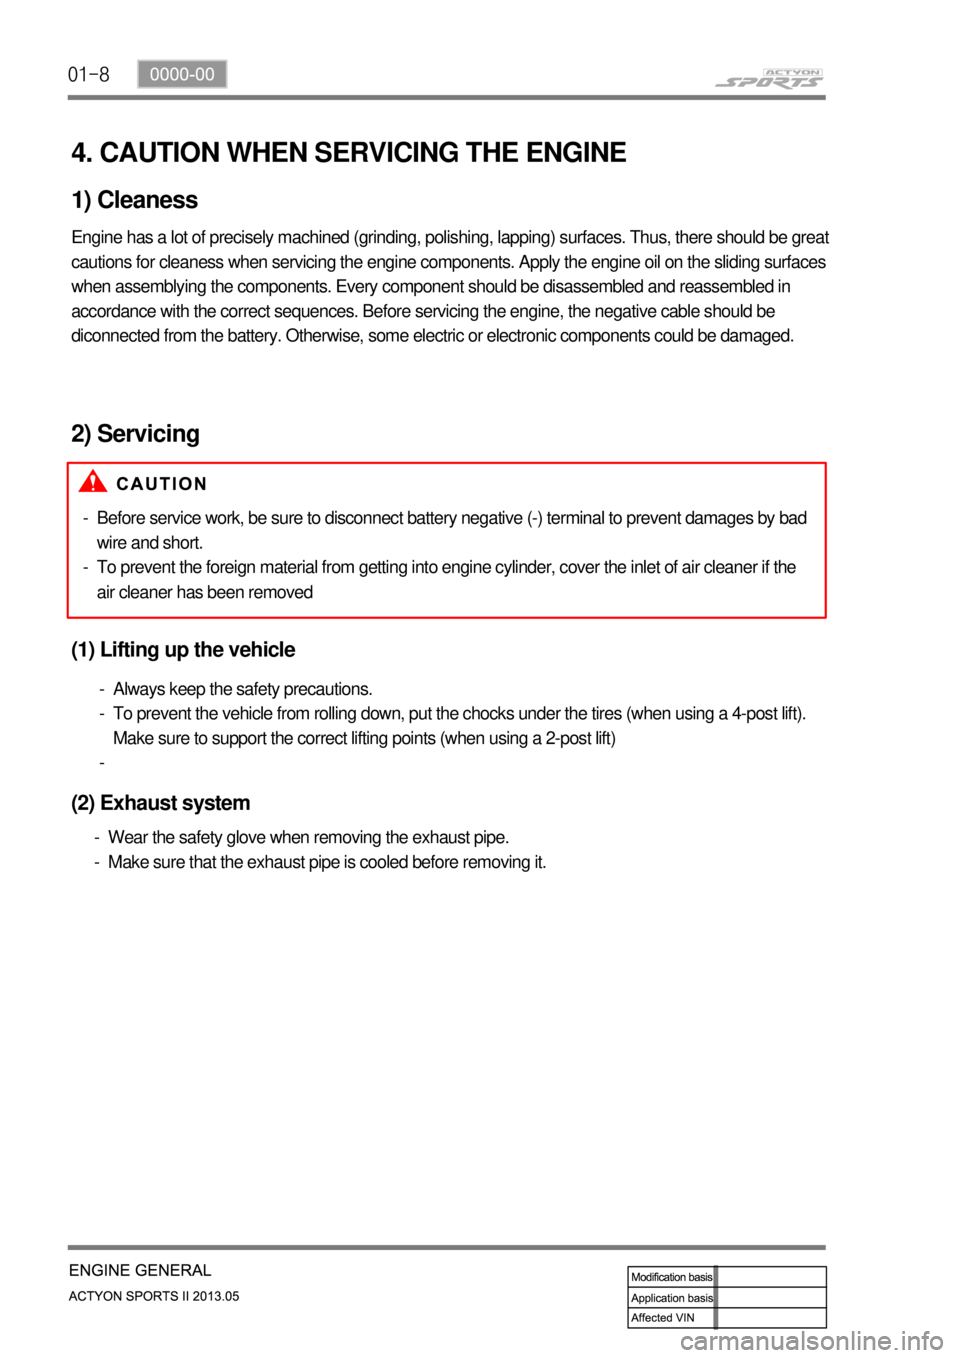 SSANGYONG NEW ACTYON SPORTS 2013  Service Manual 01-8
4. CAUTION WHEN SERVICING THE ENGINE
1) Cleaness
Engine has a lot of precisely machined (grinding, polishing, lapping) surfaces. Thus, there should be great 
cautions for cleaness when servicing 